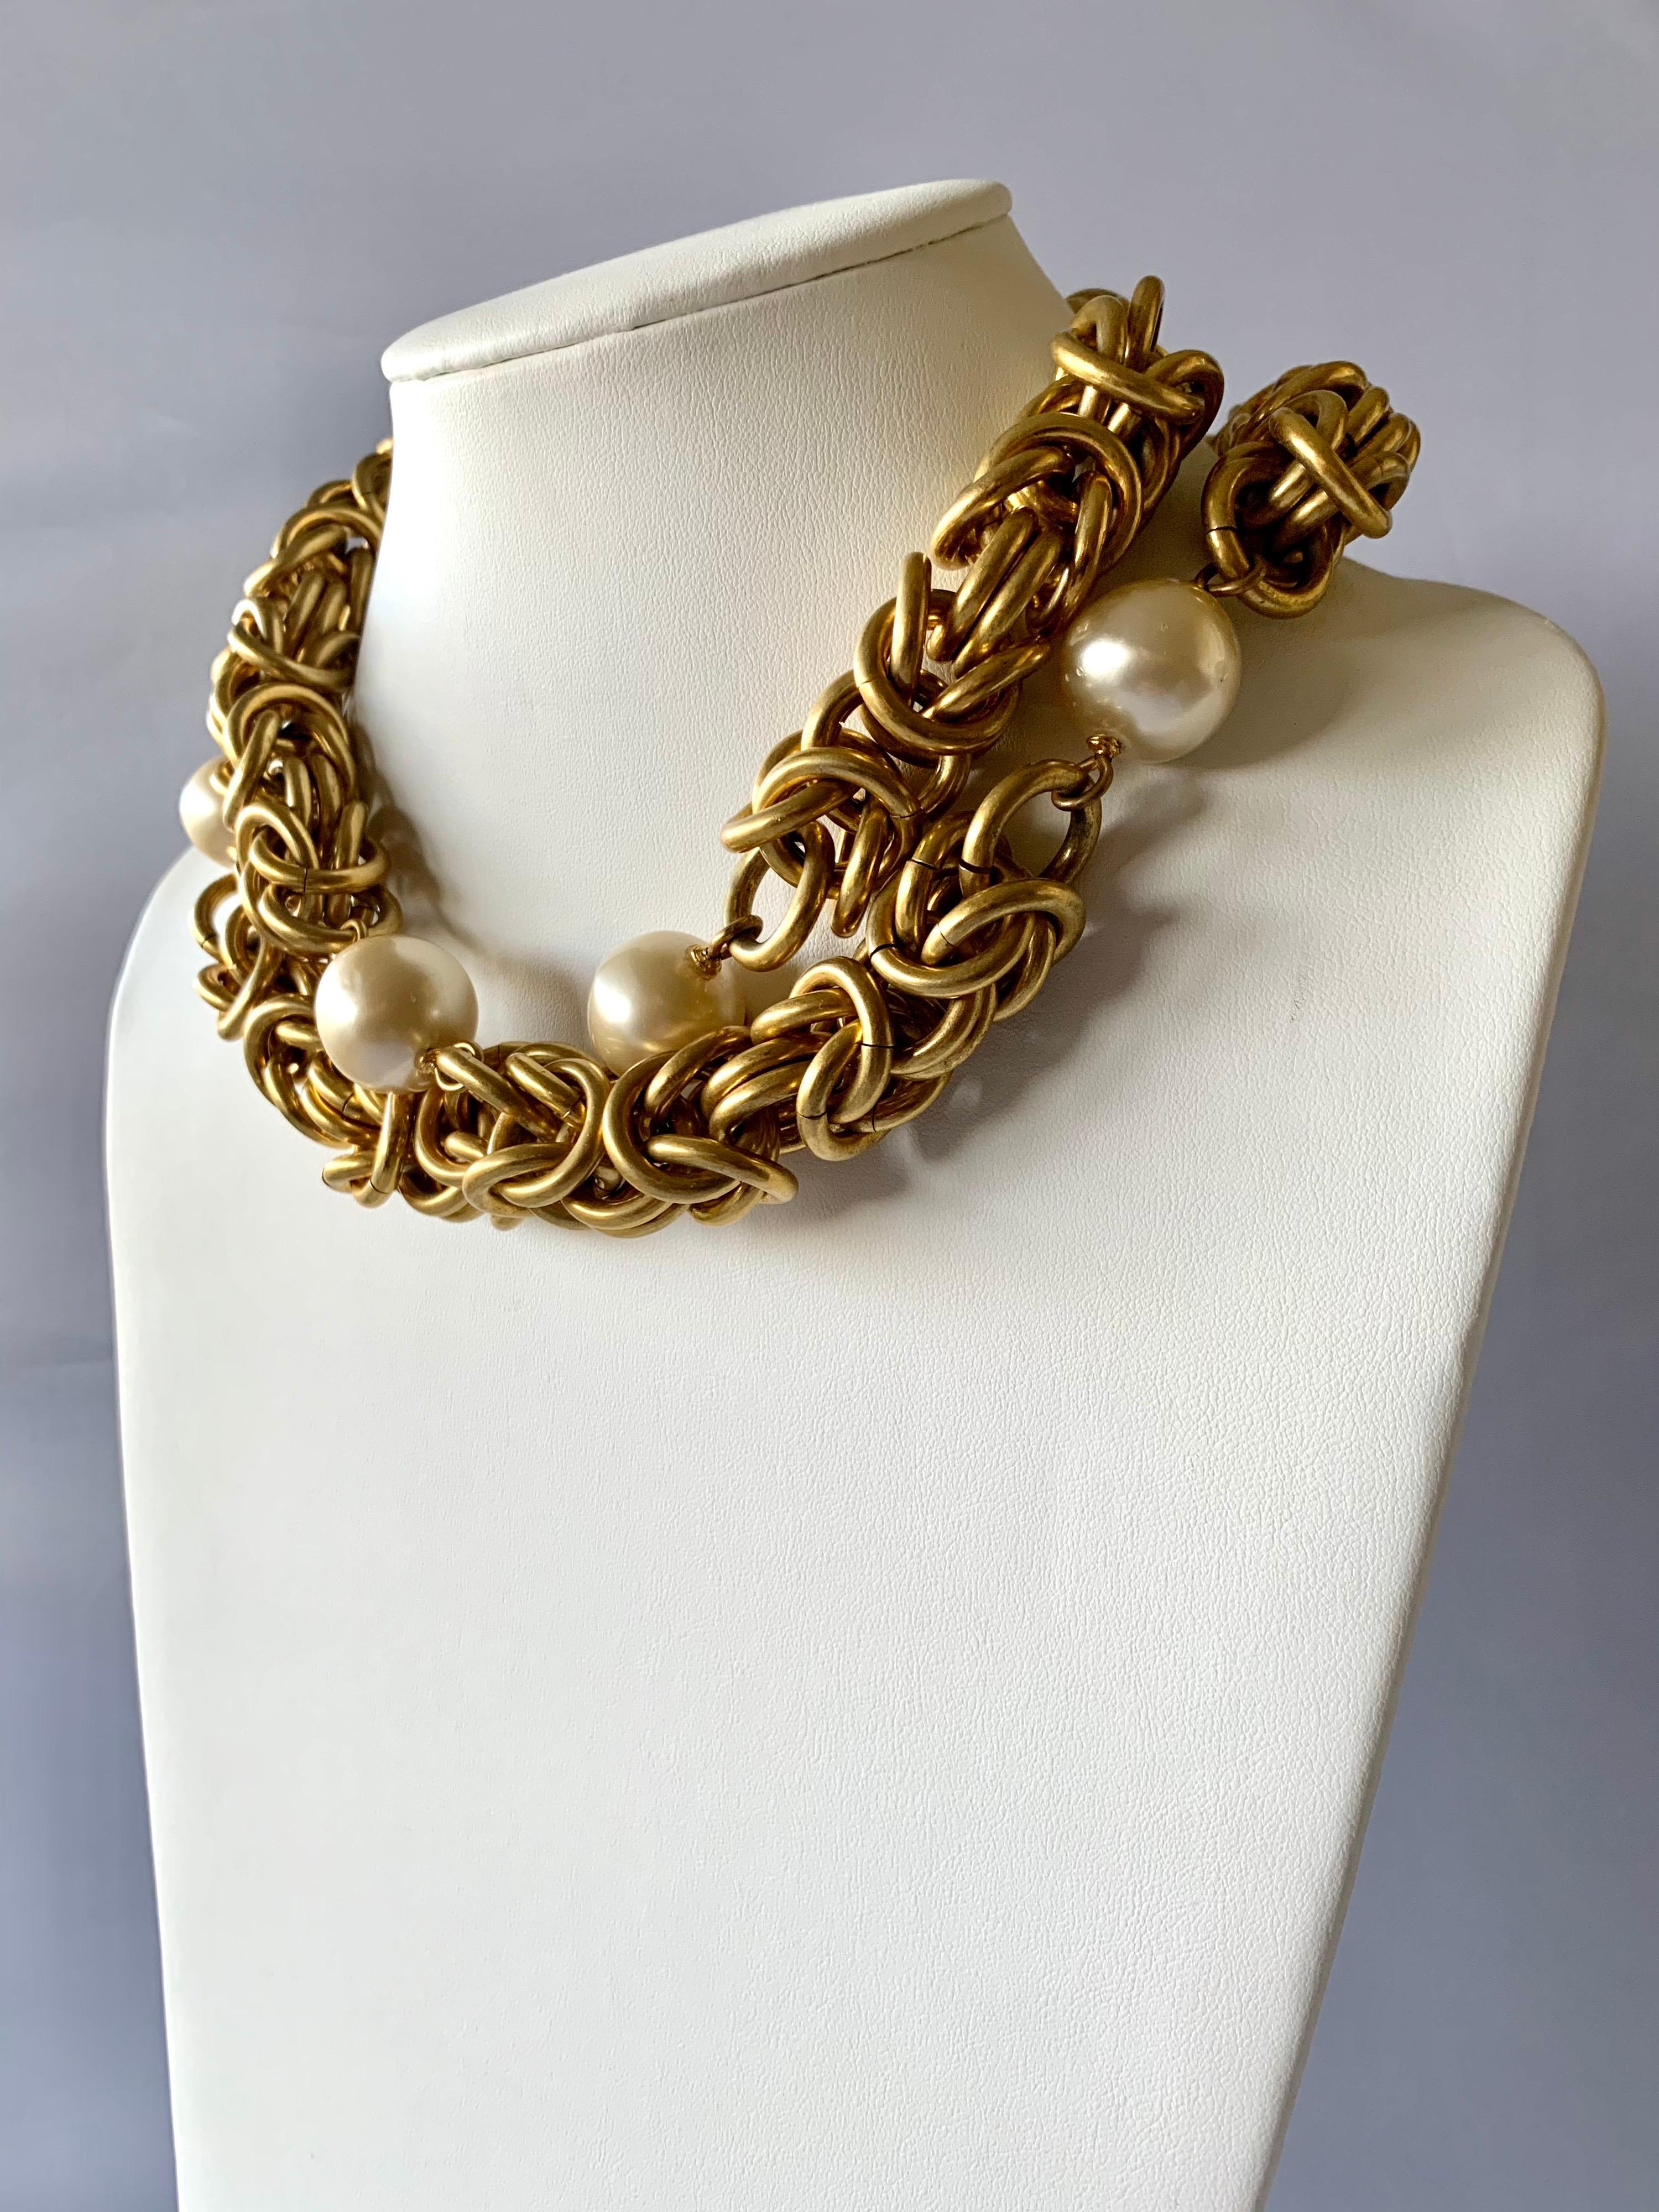 Vintage important Chanel runway gold-tone rope-link necklace with fixed faux pearls stations and spring clasp closure signed Chanel from the Fall/Winter 1994 collection. The necklace is large in scale and can be doubled around the neck.

In 1994